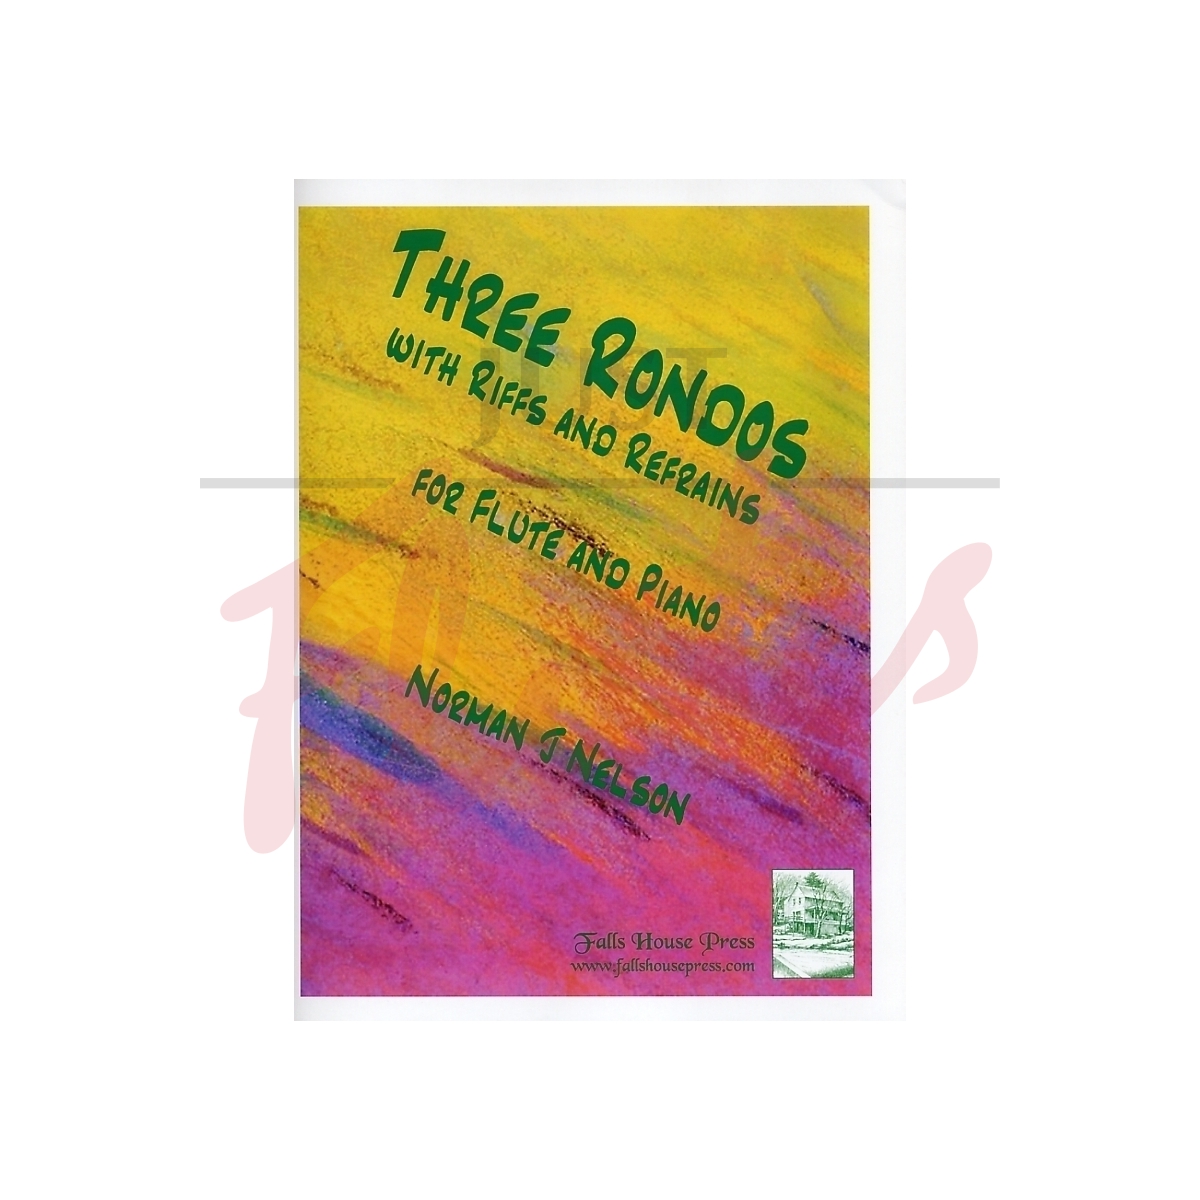 Three Rondos with Riffs &amp; Refrains for Flute and Piano